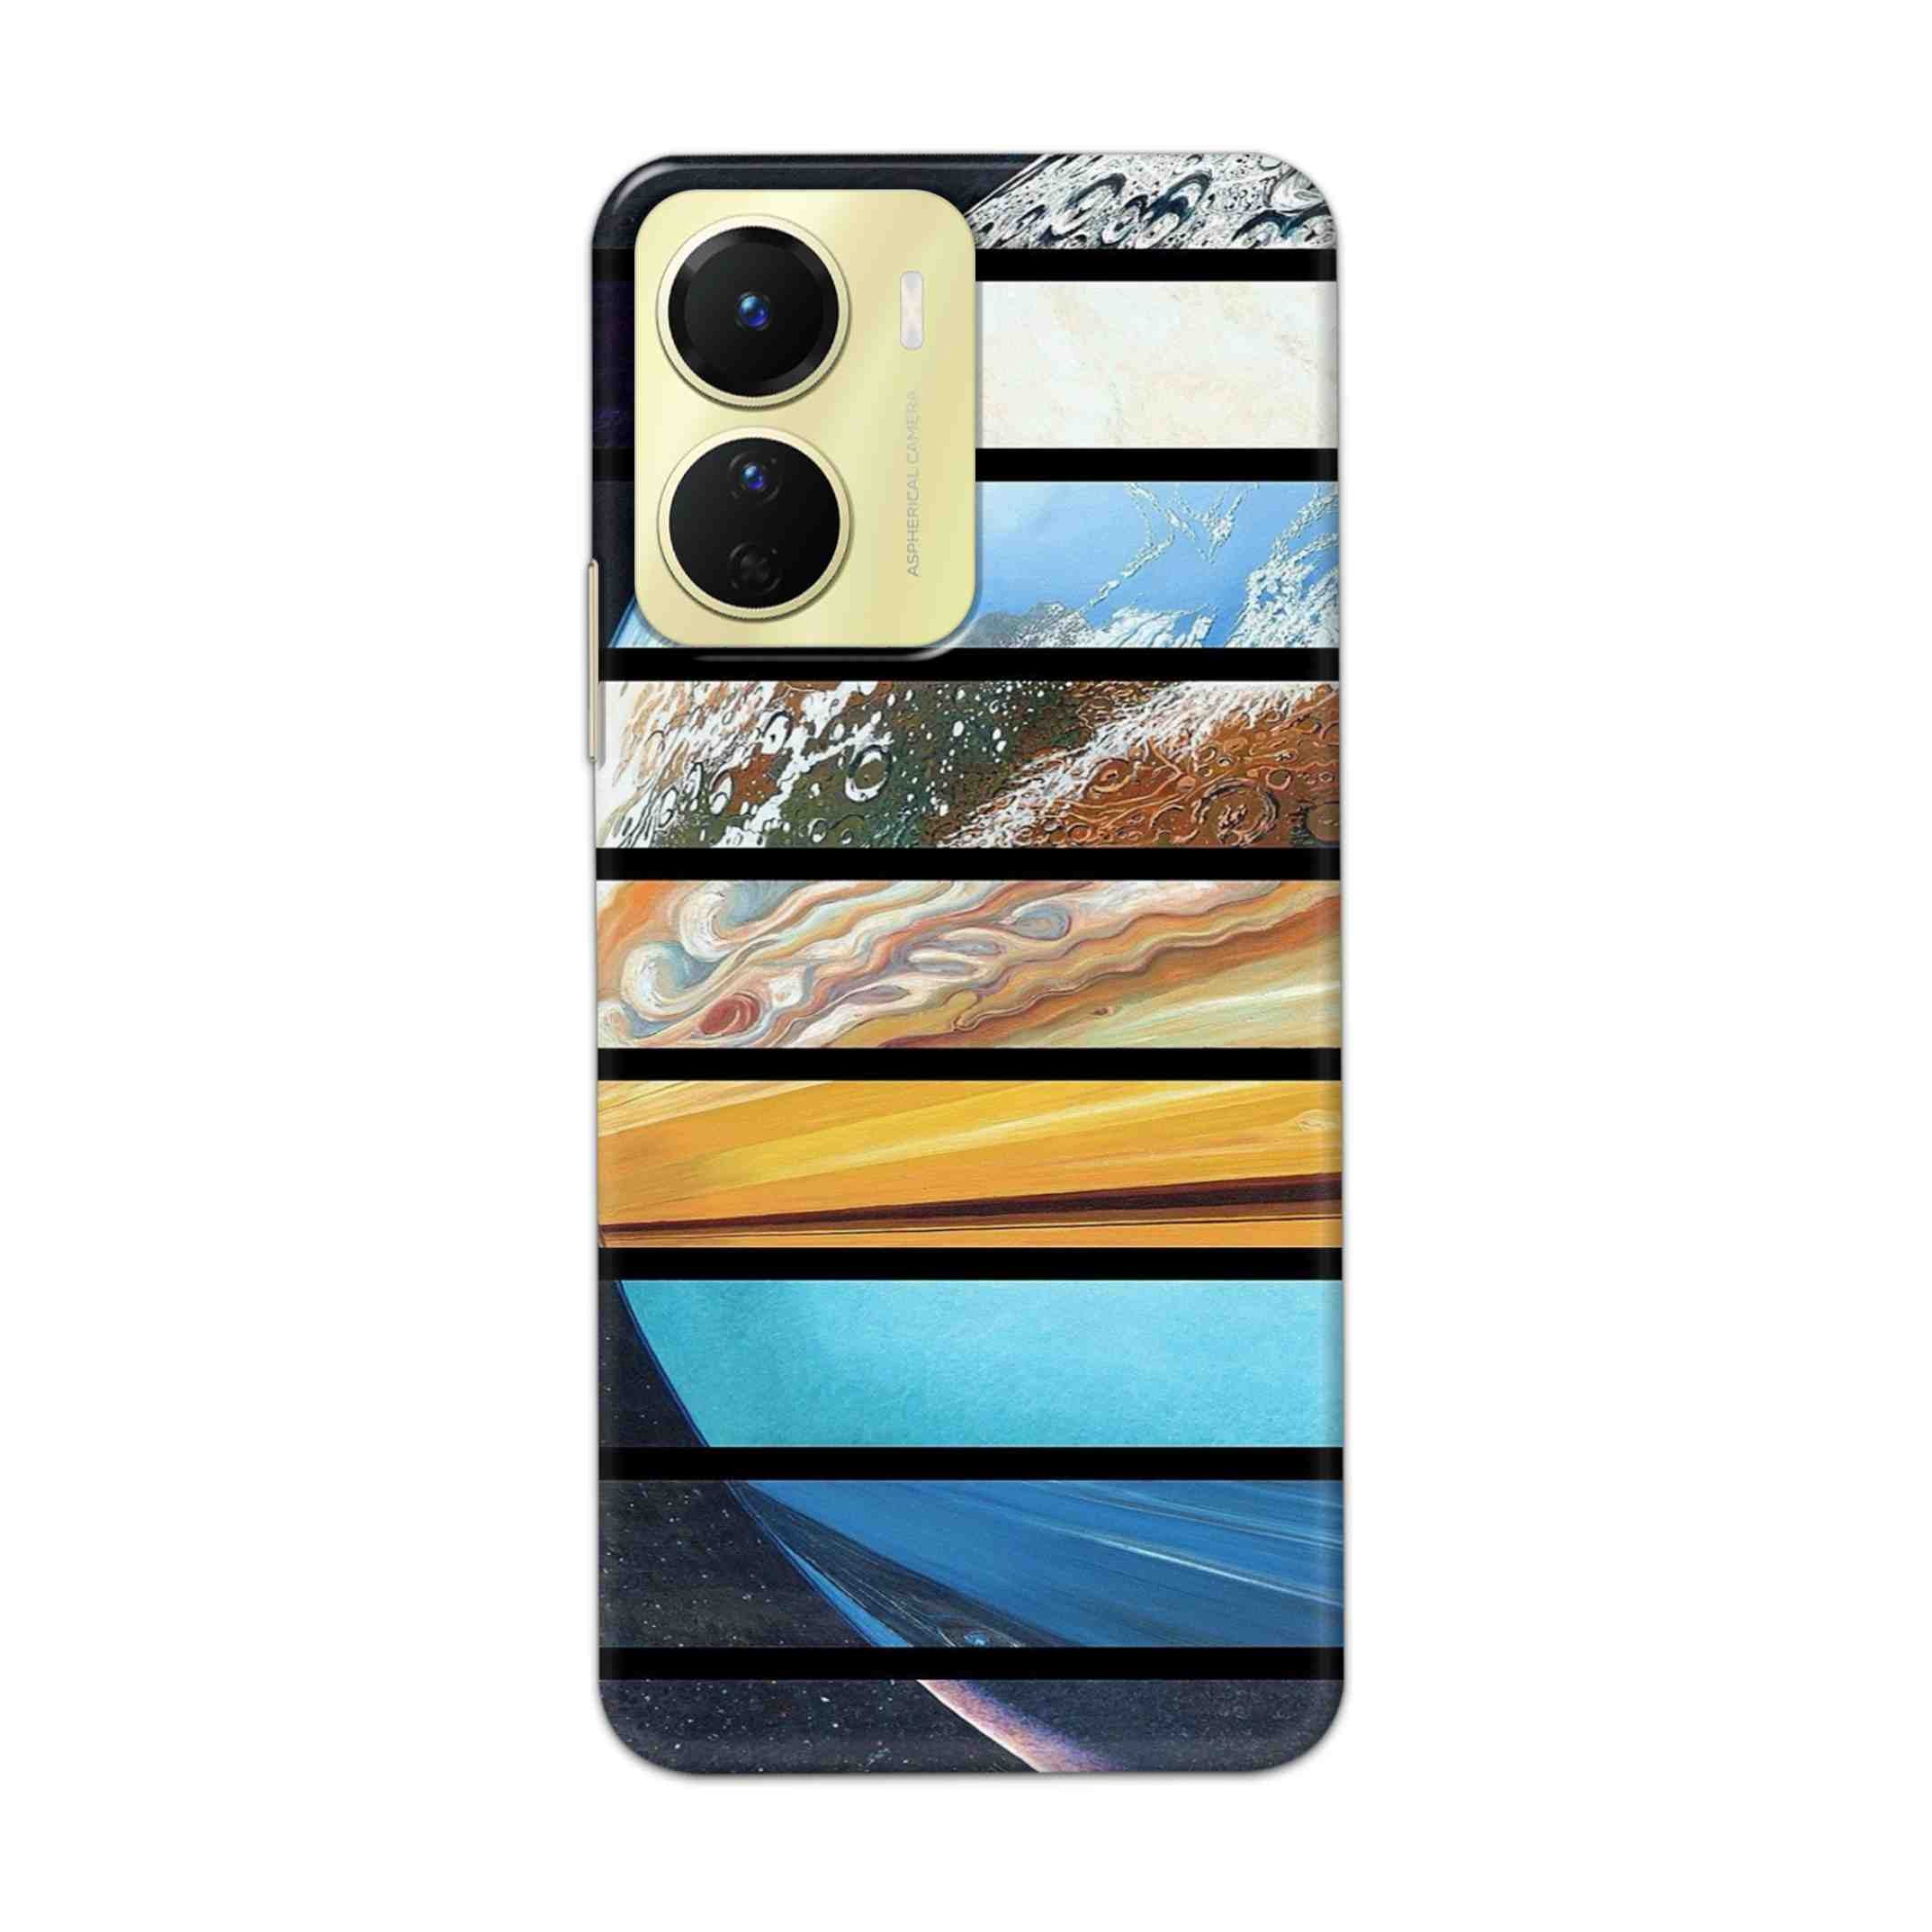 Buy Colourful Earth Hard Back Mobile Phone Case Cover For Vivo Y16 Online